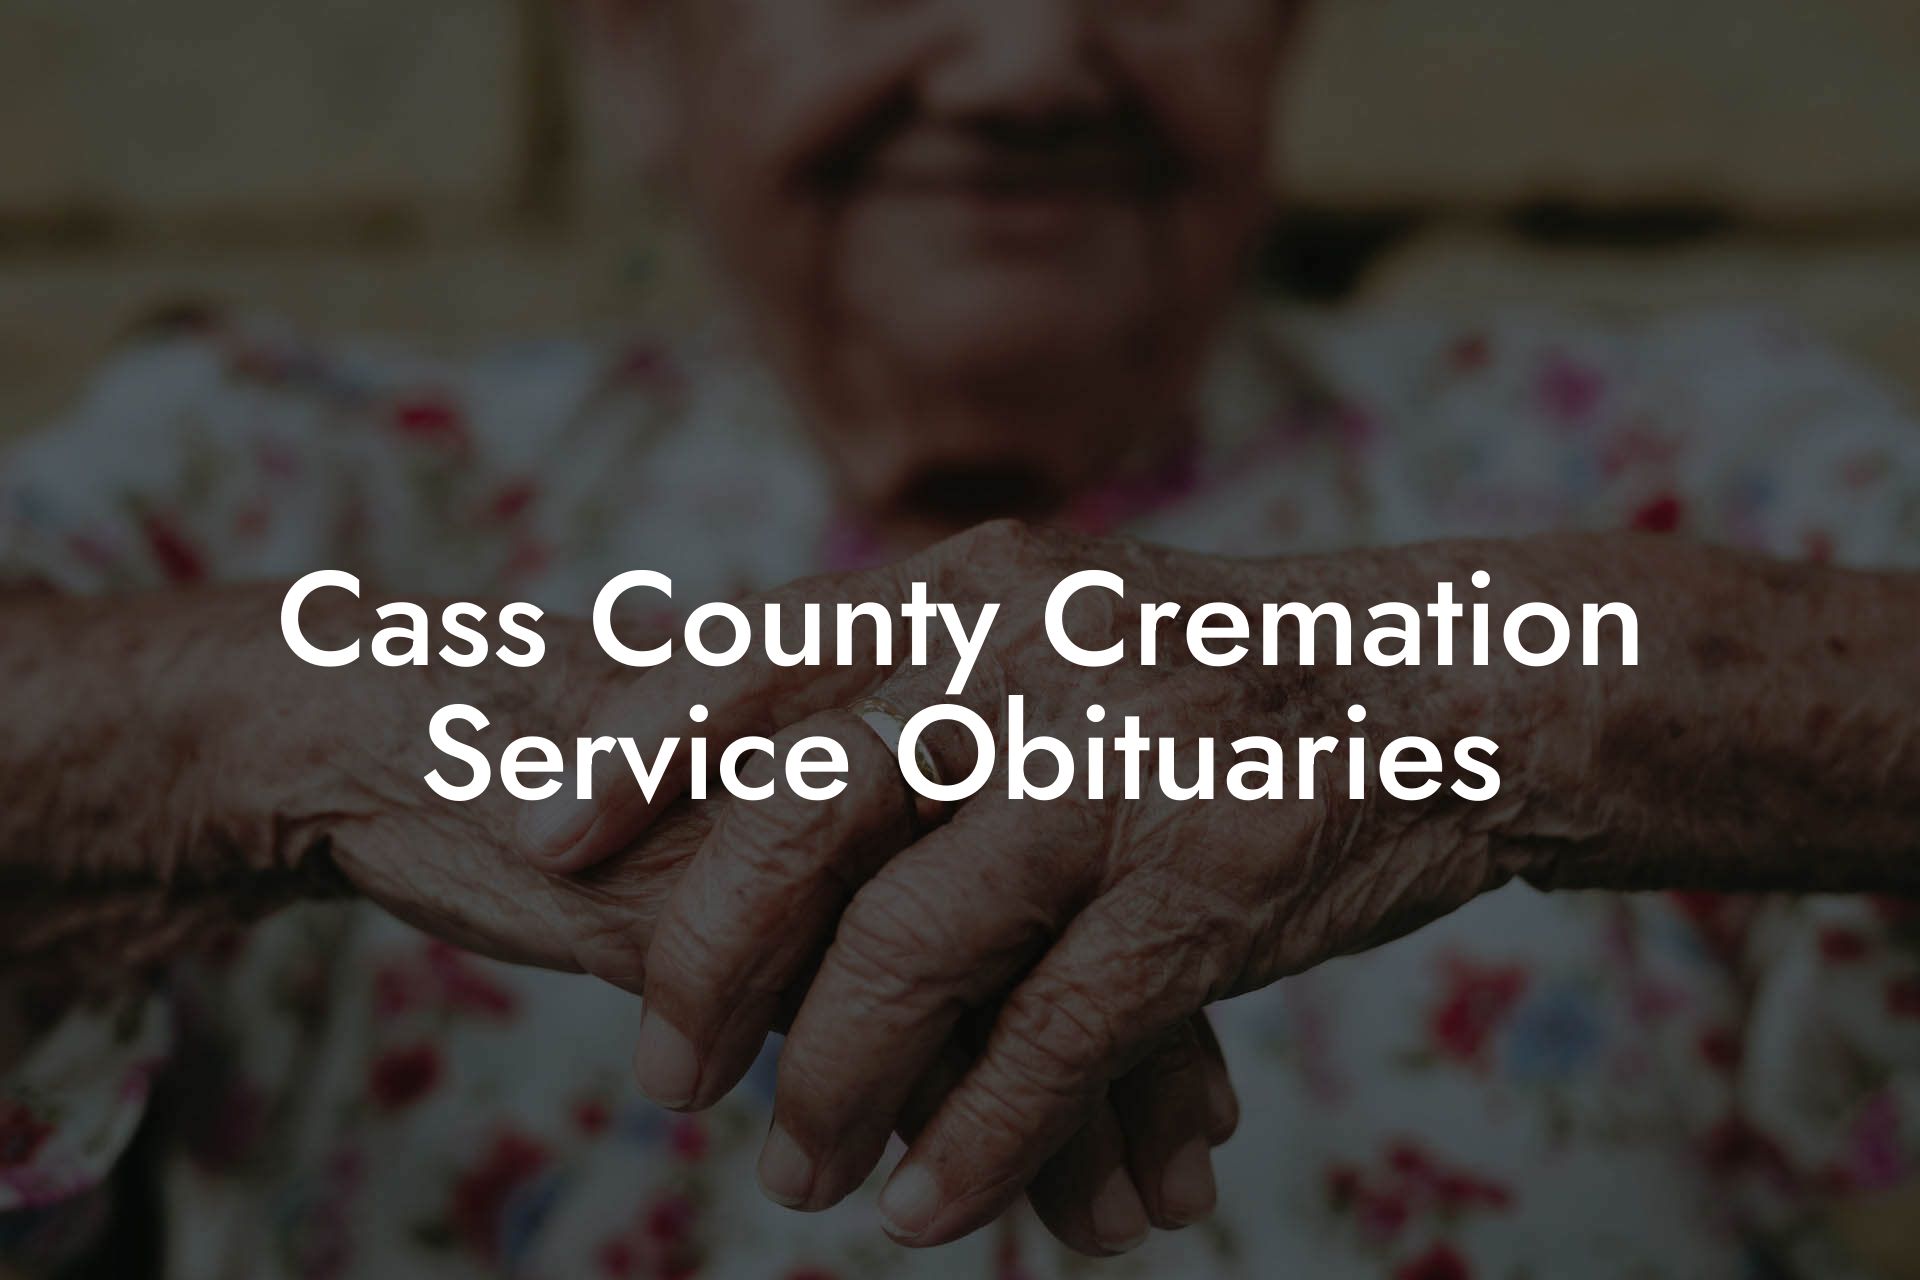 Cass County Cremation Service Obituaries